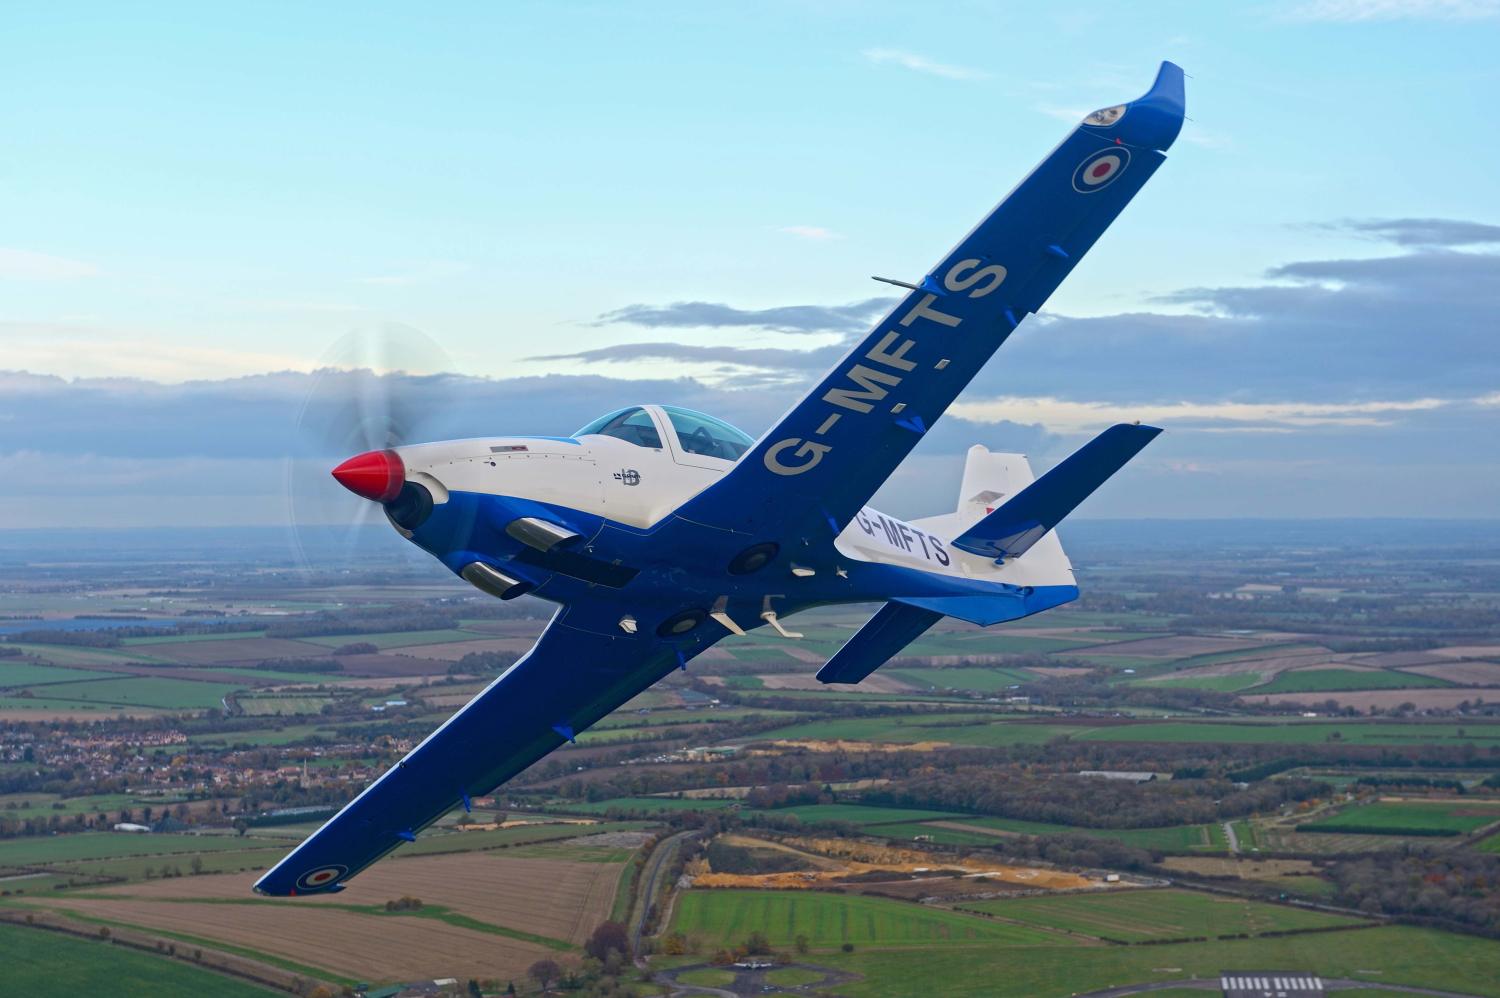 Affinity Flying Training Services' Grob 120TP has achieved Military Release to Service, moving the aircraft a step closer to commencing its role as the next Elementary Flying Training aircraft for the UK Ministry of Defence. (picture: Jamie Hunter).